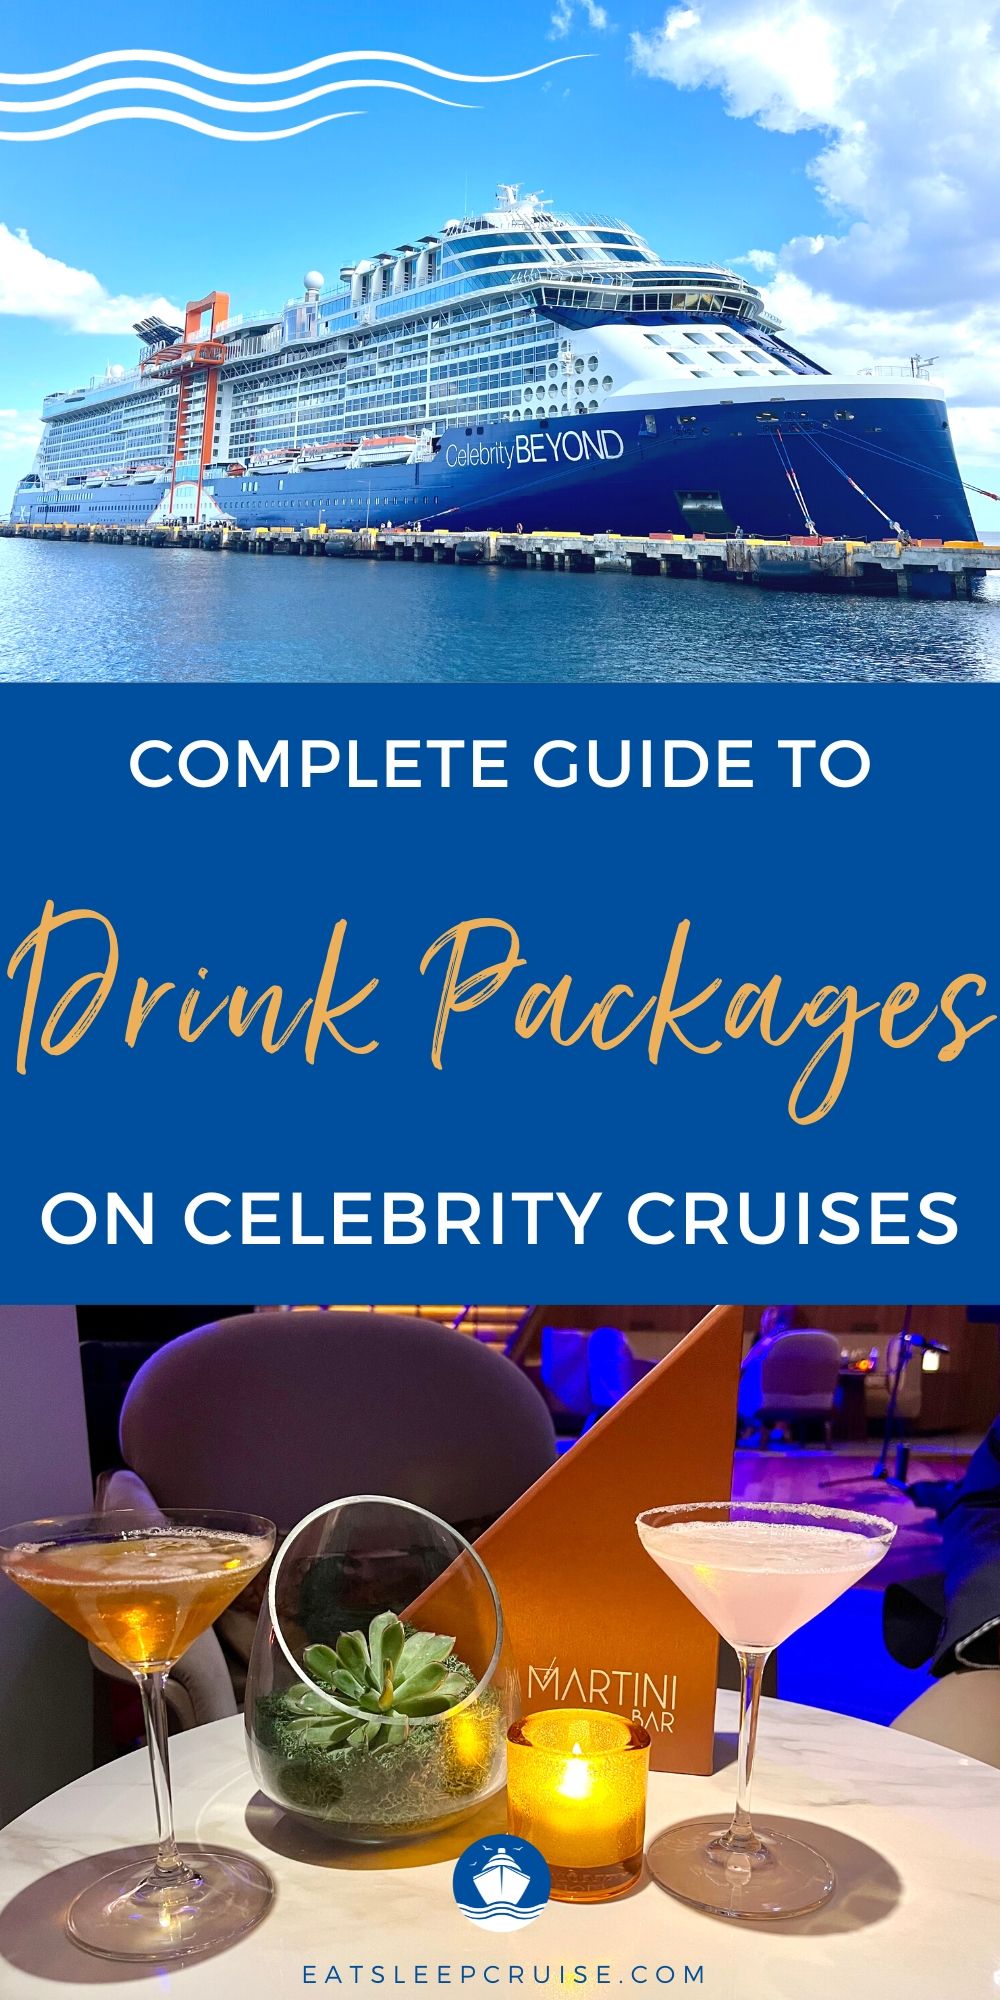 Should you purchase a Celebrity Cruise drink package?